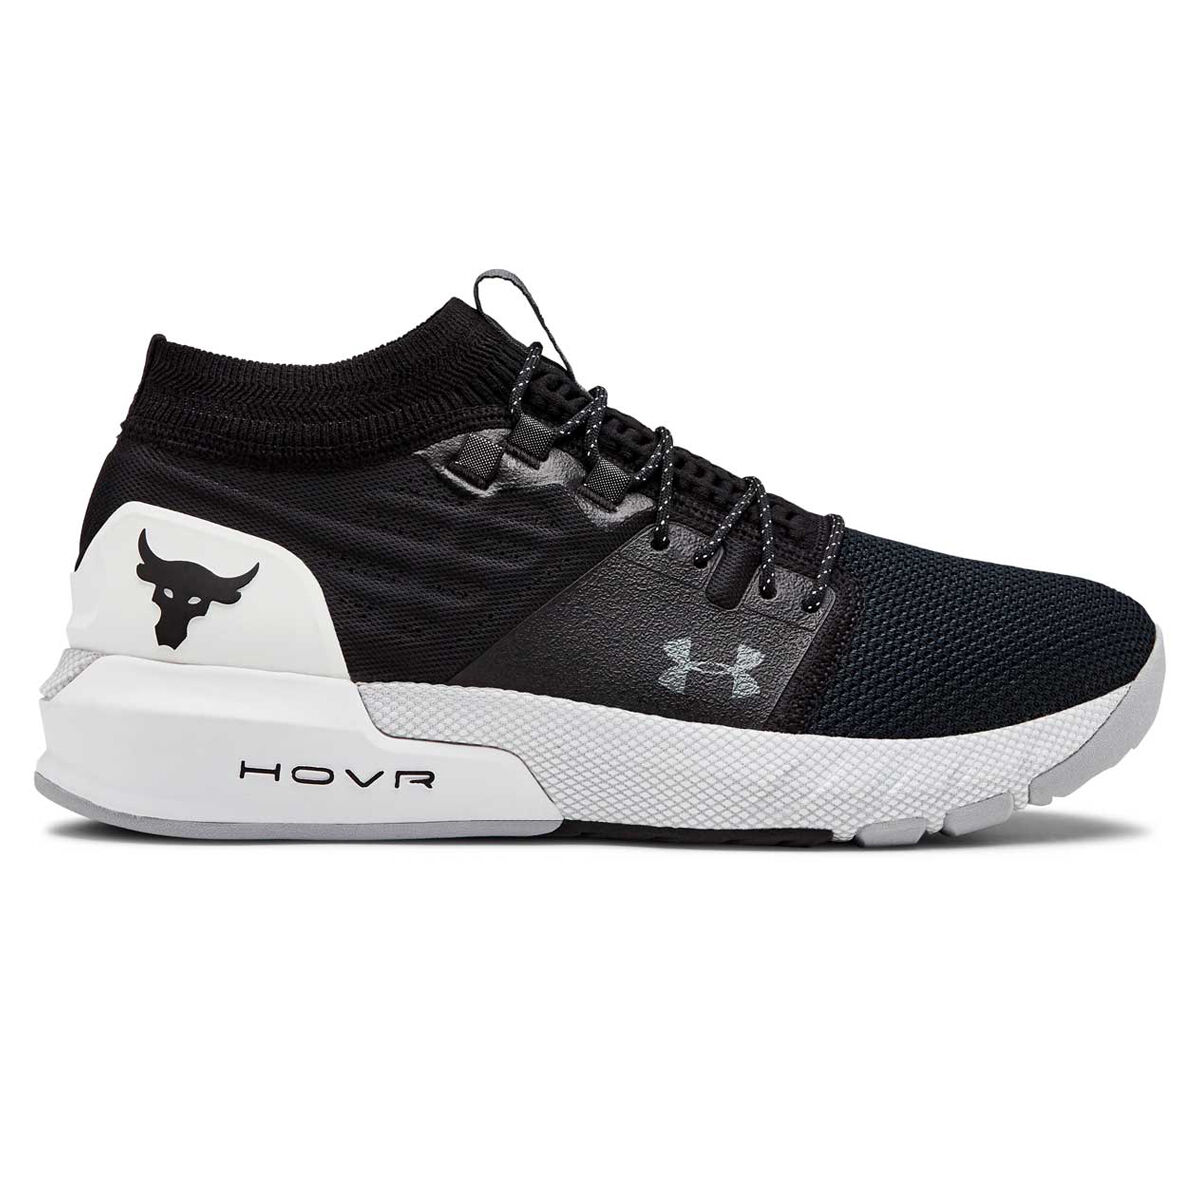 Project Rock 2 Mens Training Shoes 